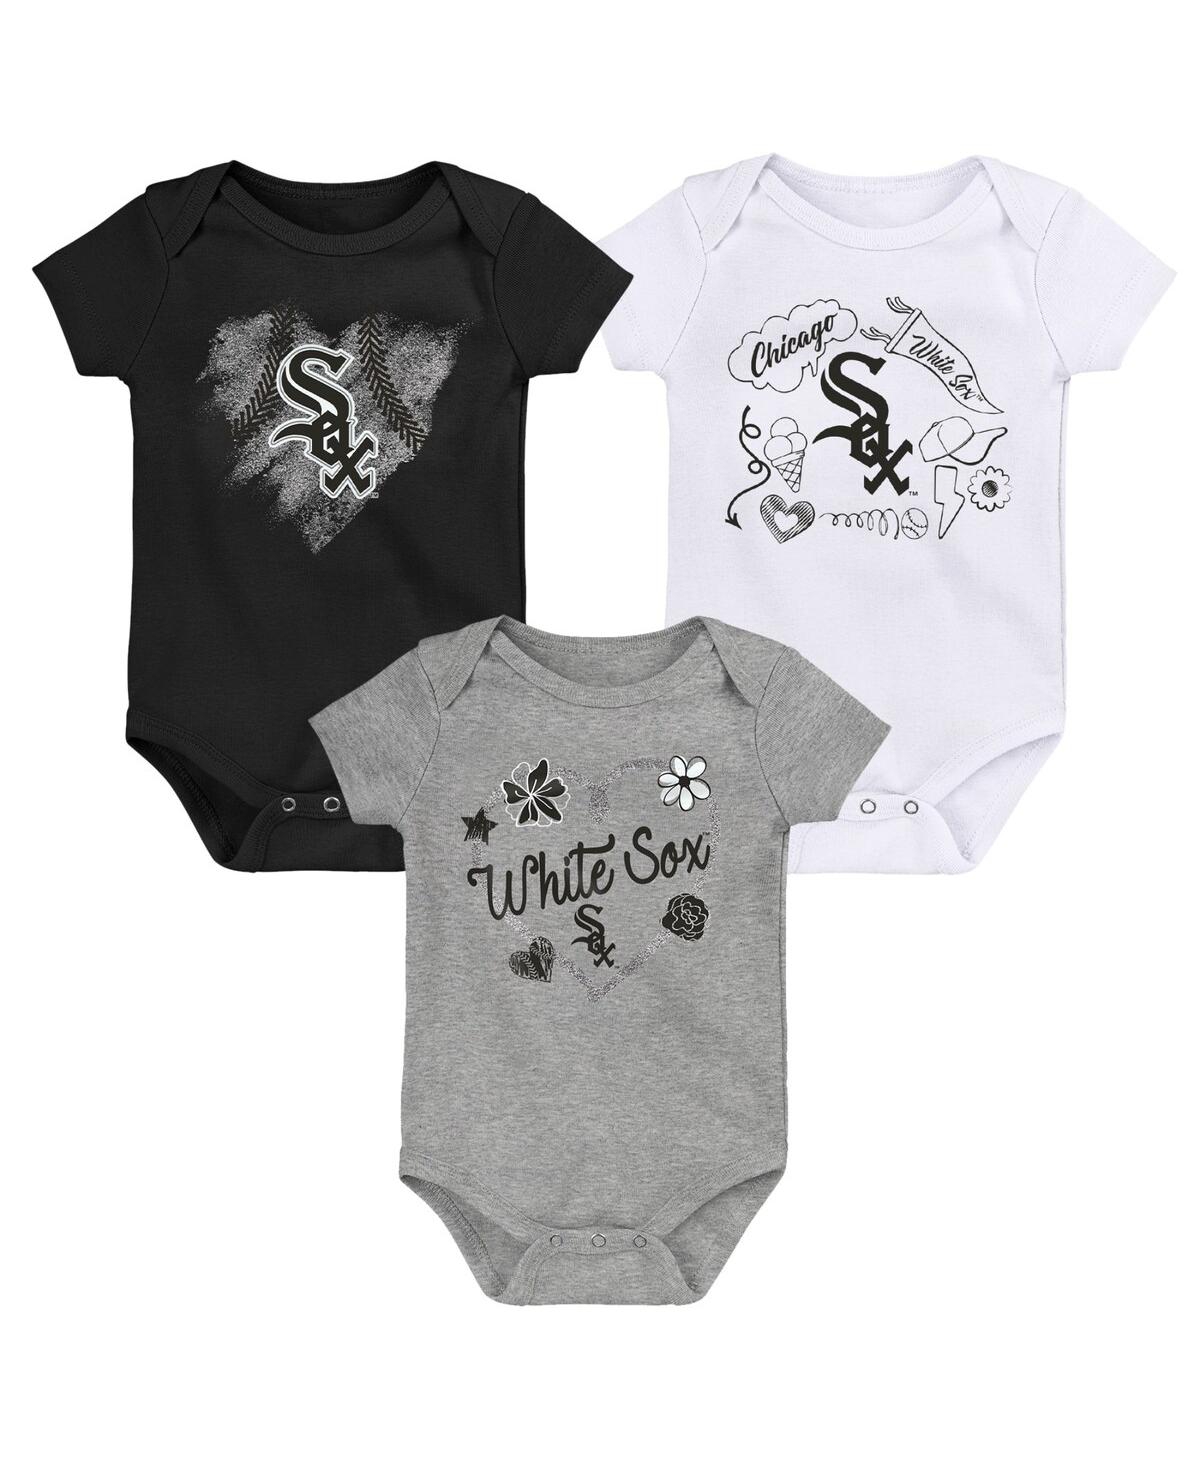 OUTERSTUFF GIRLS NEWBORN AND INFANT BLACK, WHITE, HEATHERED GRAY CHICAGO WHITE SOX 3-PACK BATTER UP BODYSUIT SE